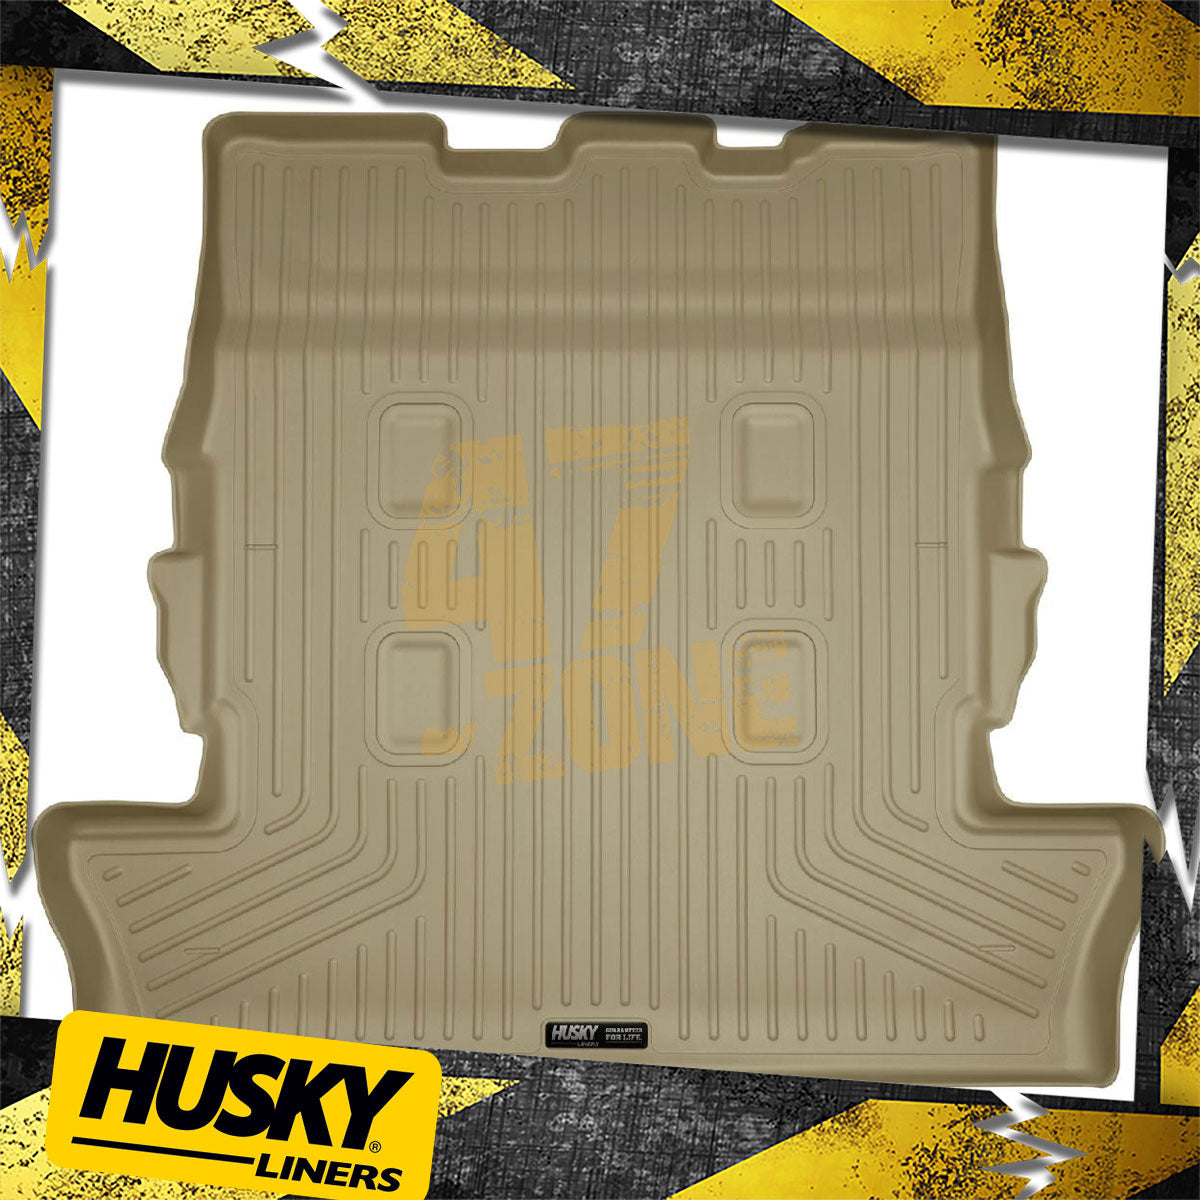 Husky Liners 25343 WeatherBeater Cargo Liner Fits 13-21 Land Cruiser LX570